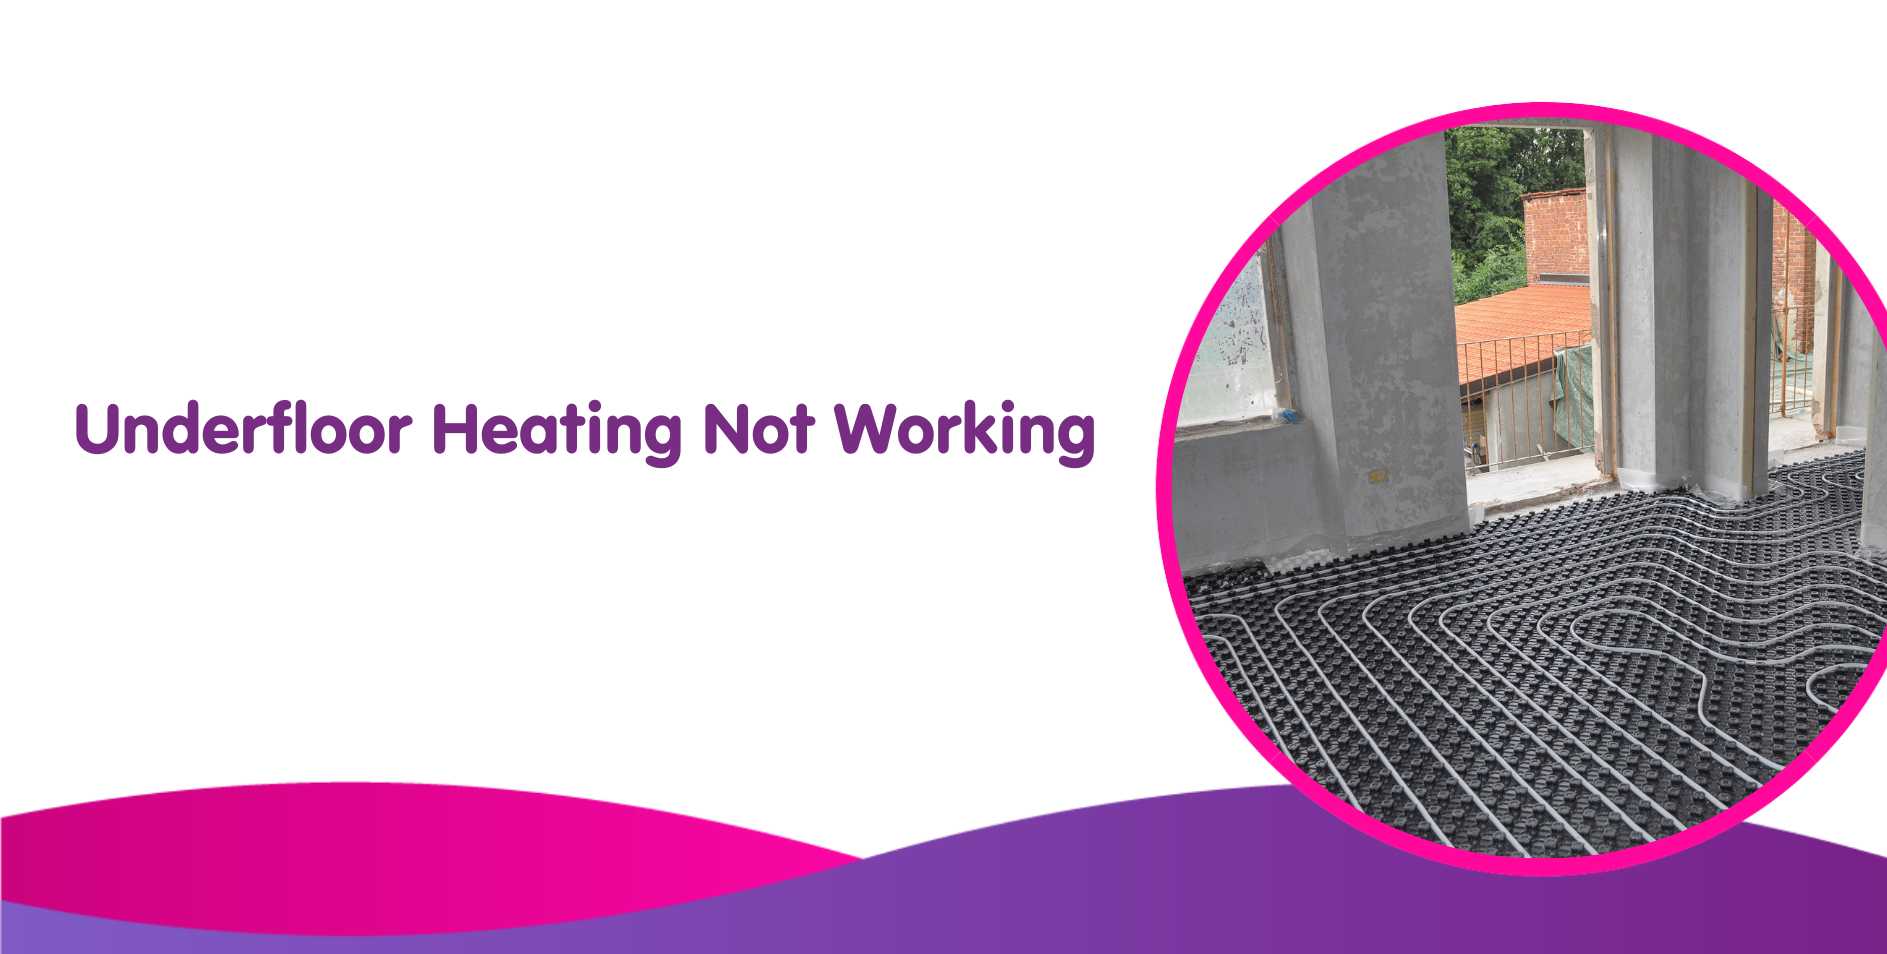 Underfloor Heating Not Working: Problems, Fixes & What to Do